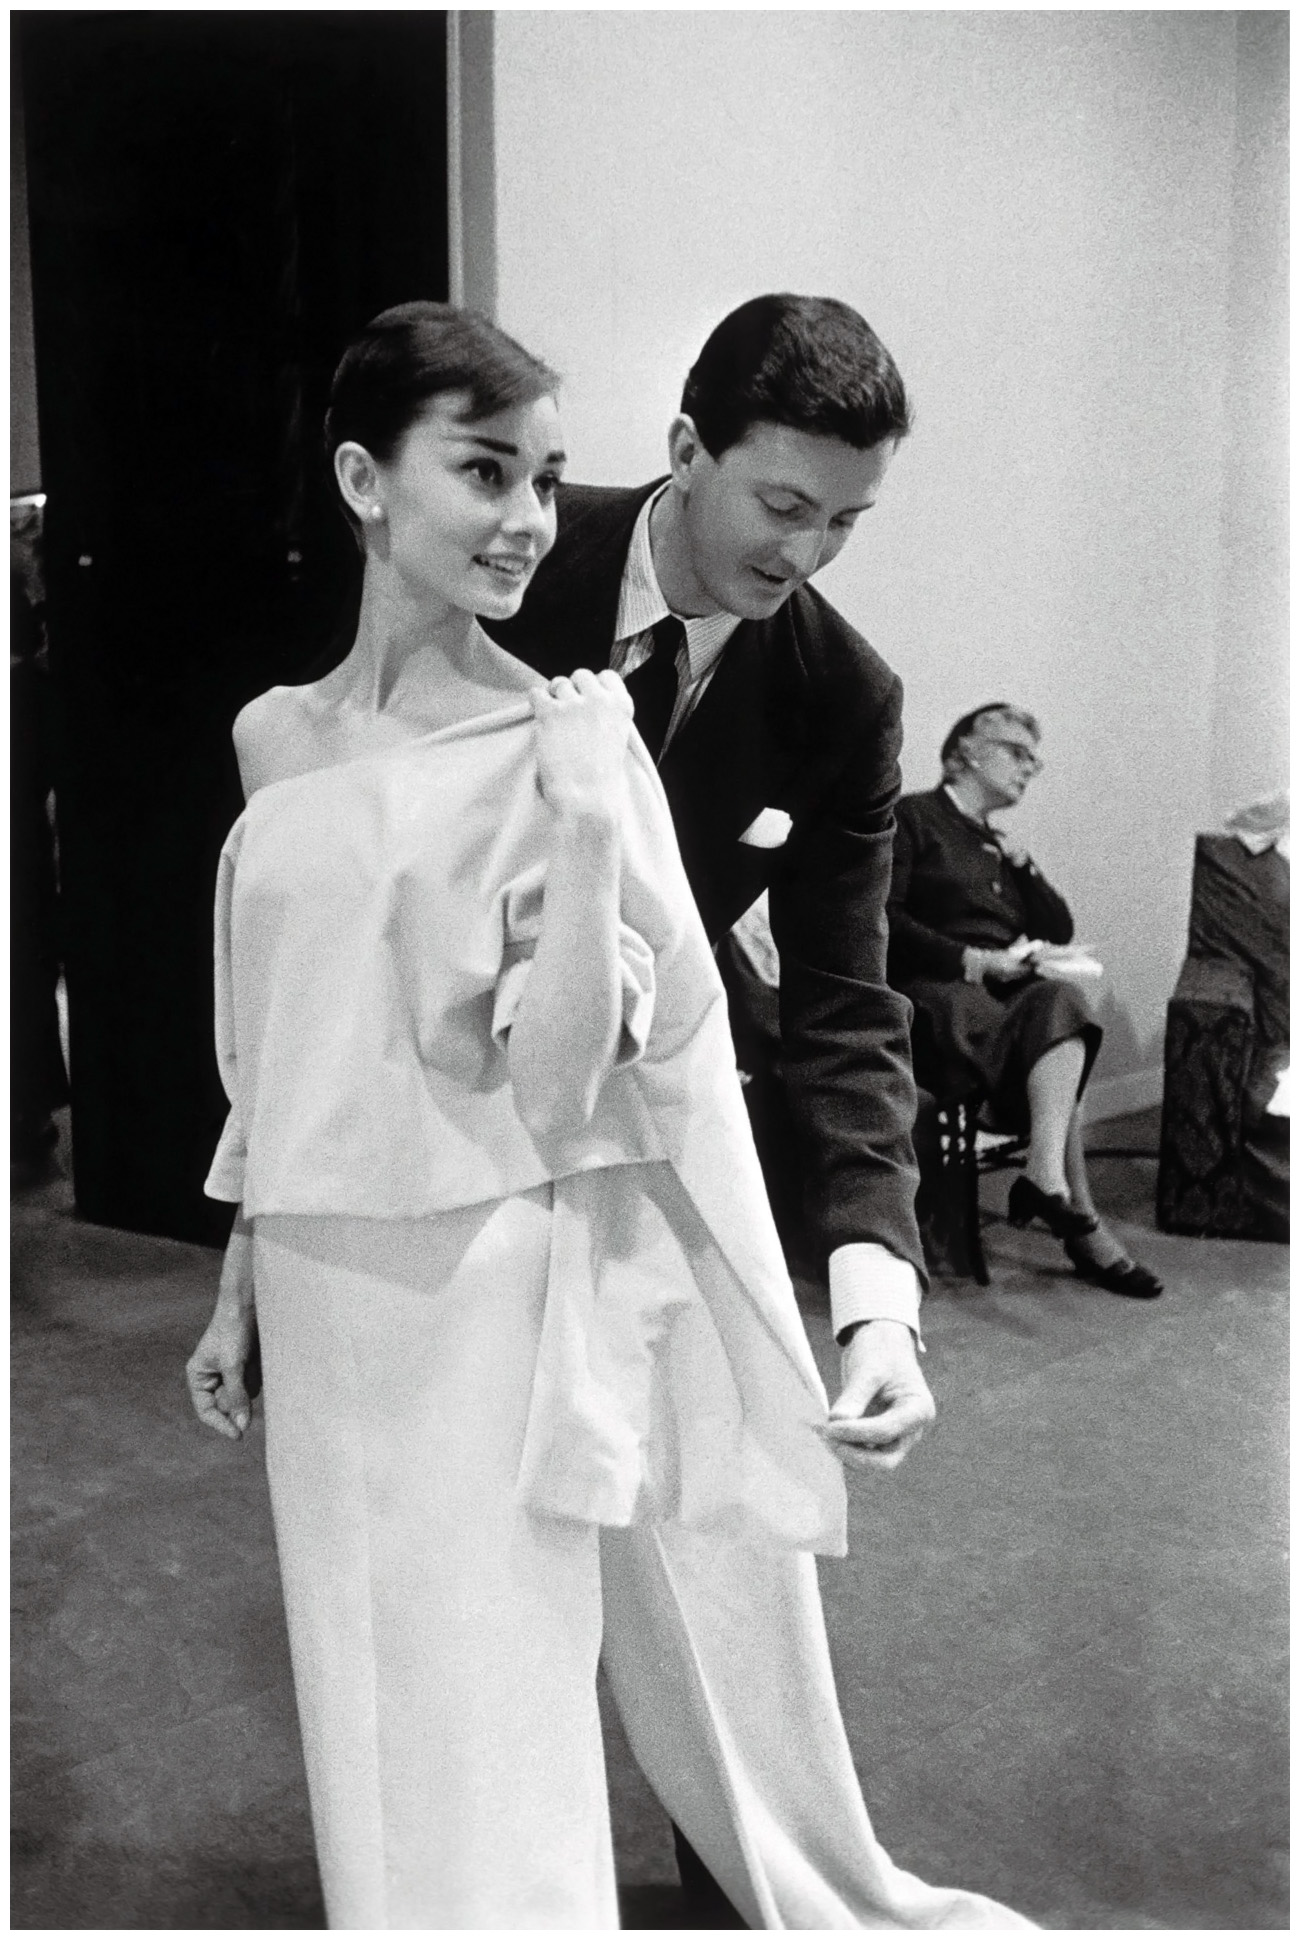 Audrey Hepburn and Hubert de Givenchy met during their 20s (Photo from Vogue Magazine)